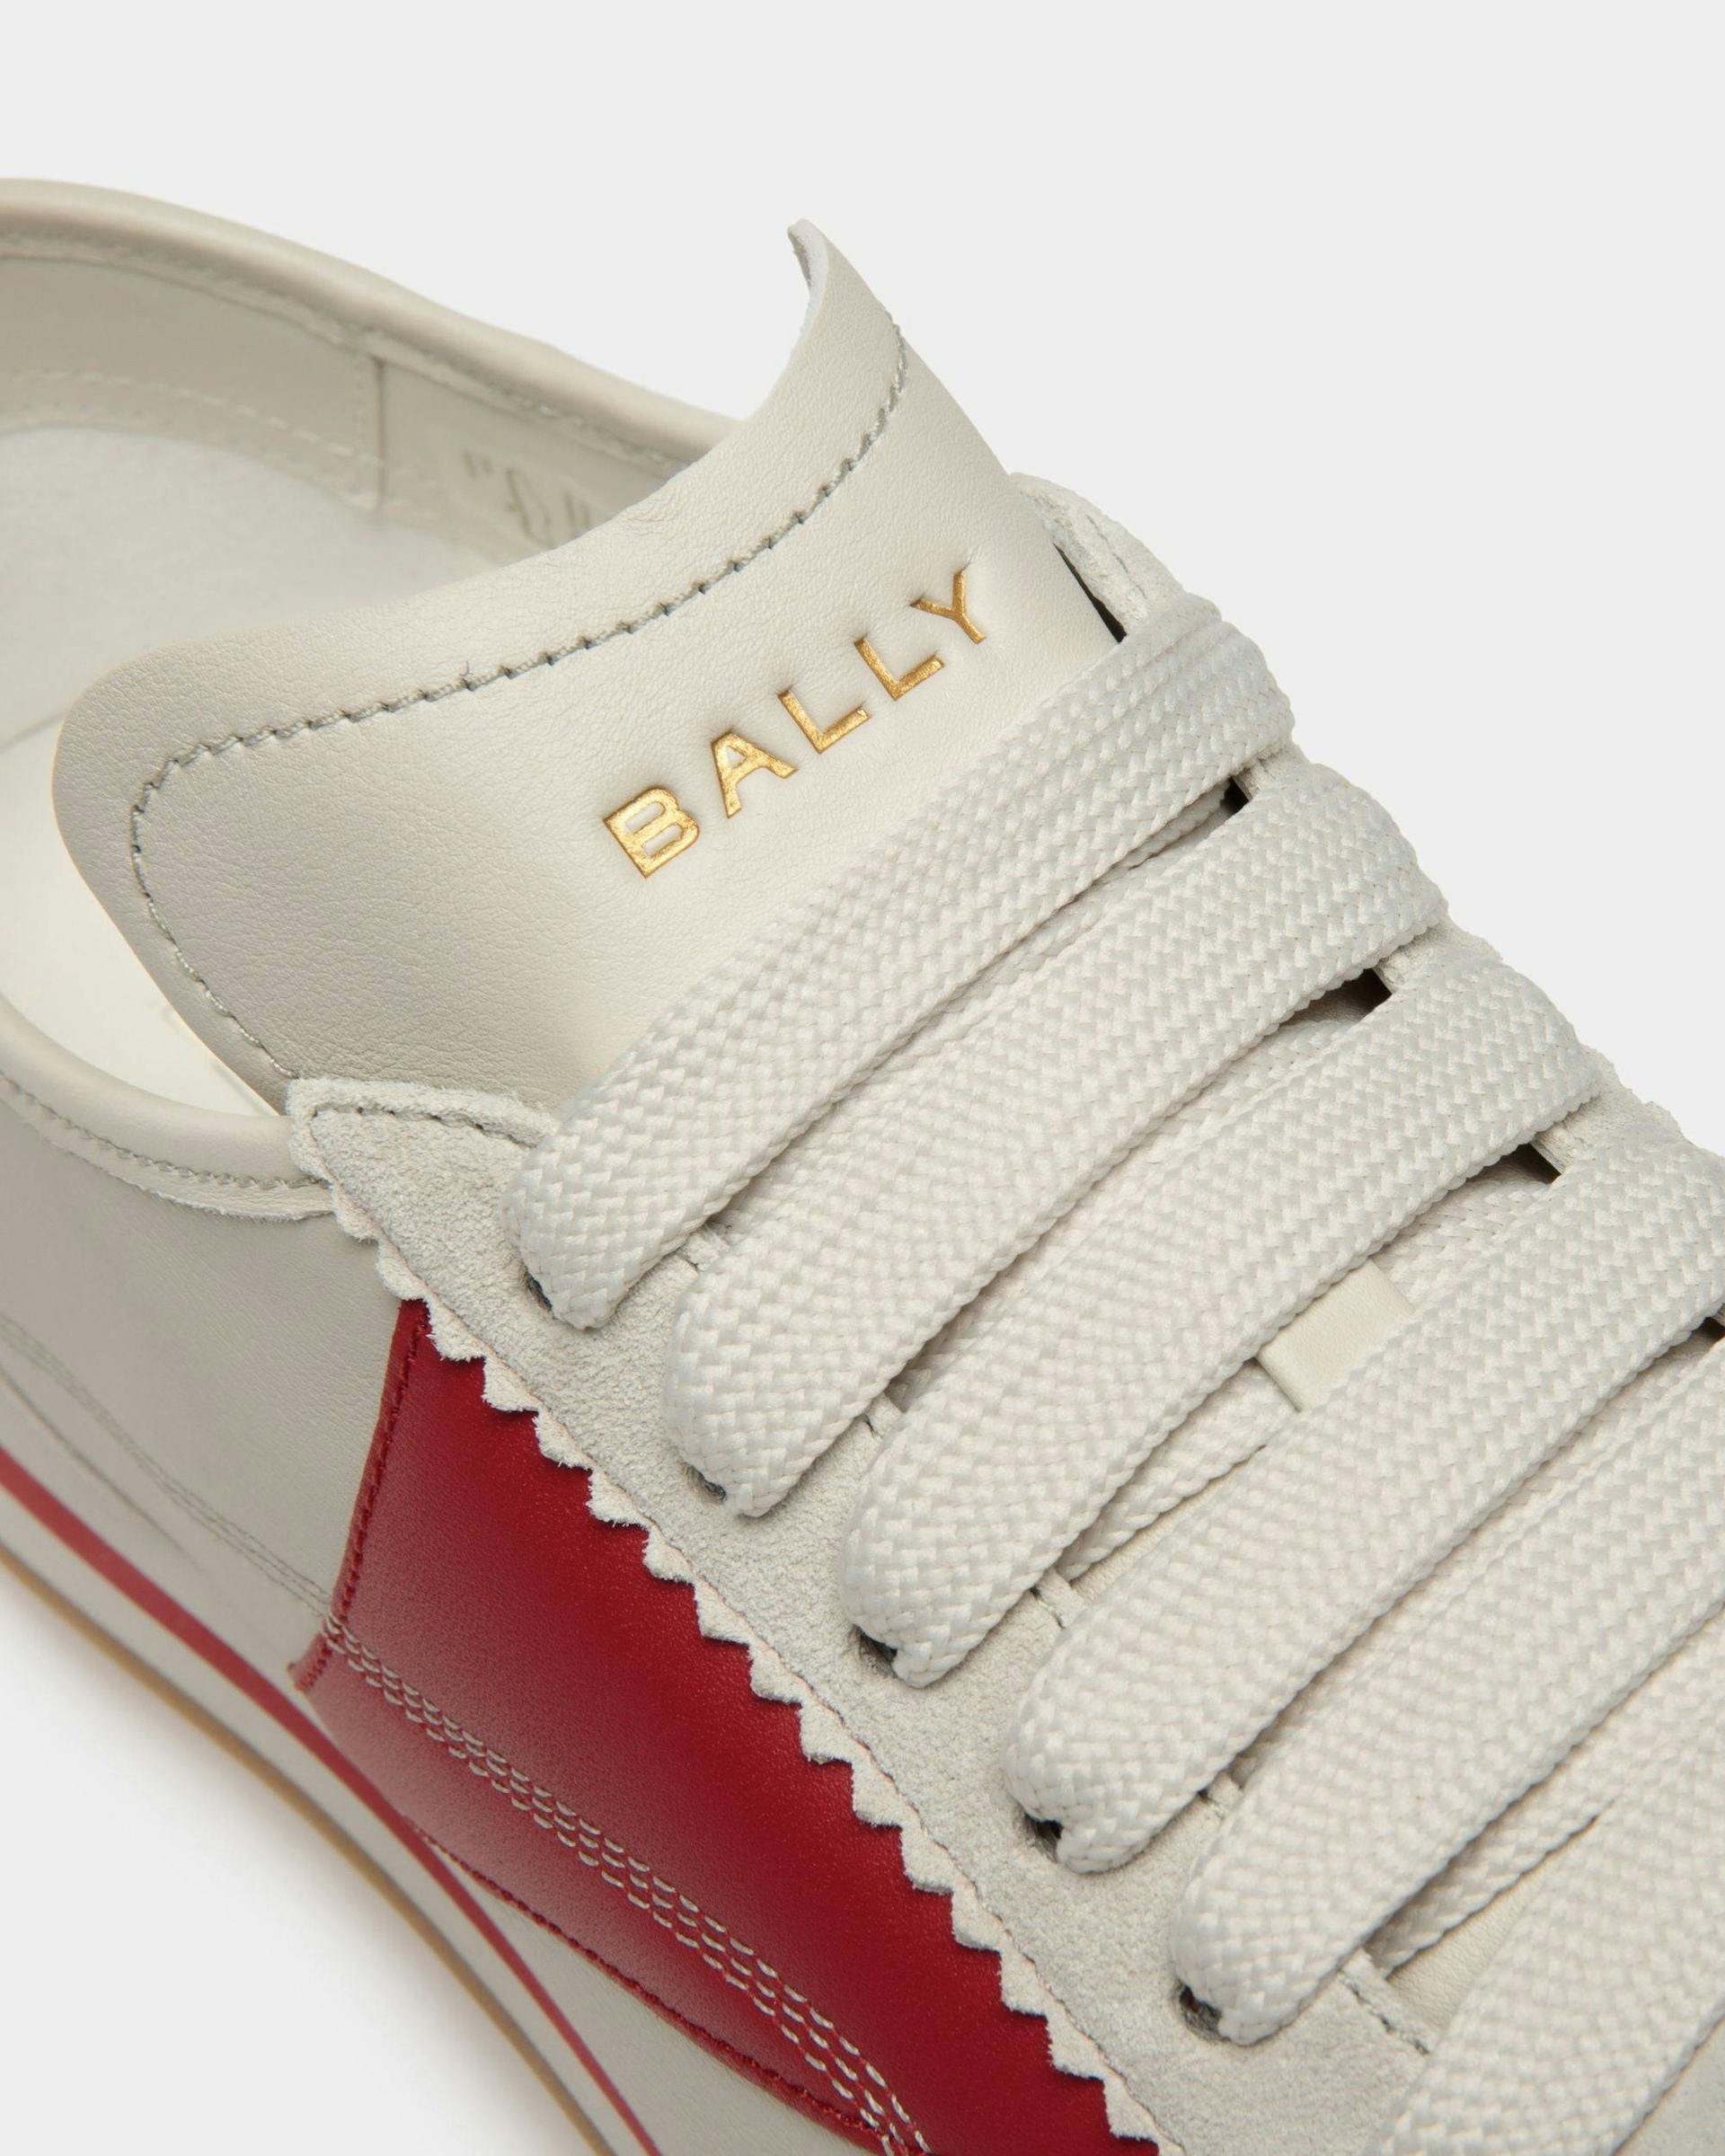 Men's Sussex Sneakers In Dusty White And Deep Ruby Leather | Bally | Still Life Detail